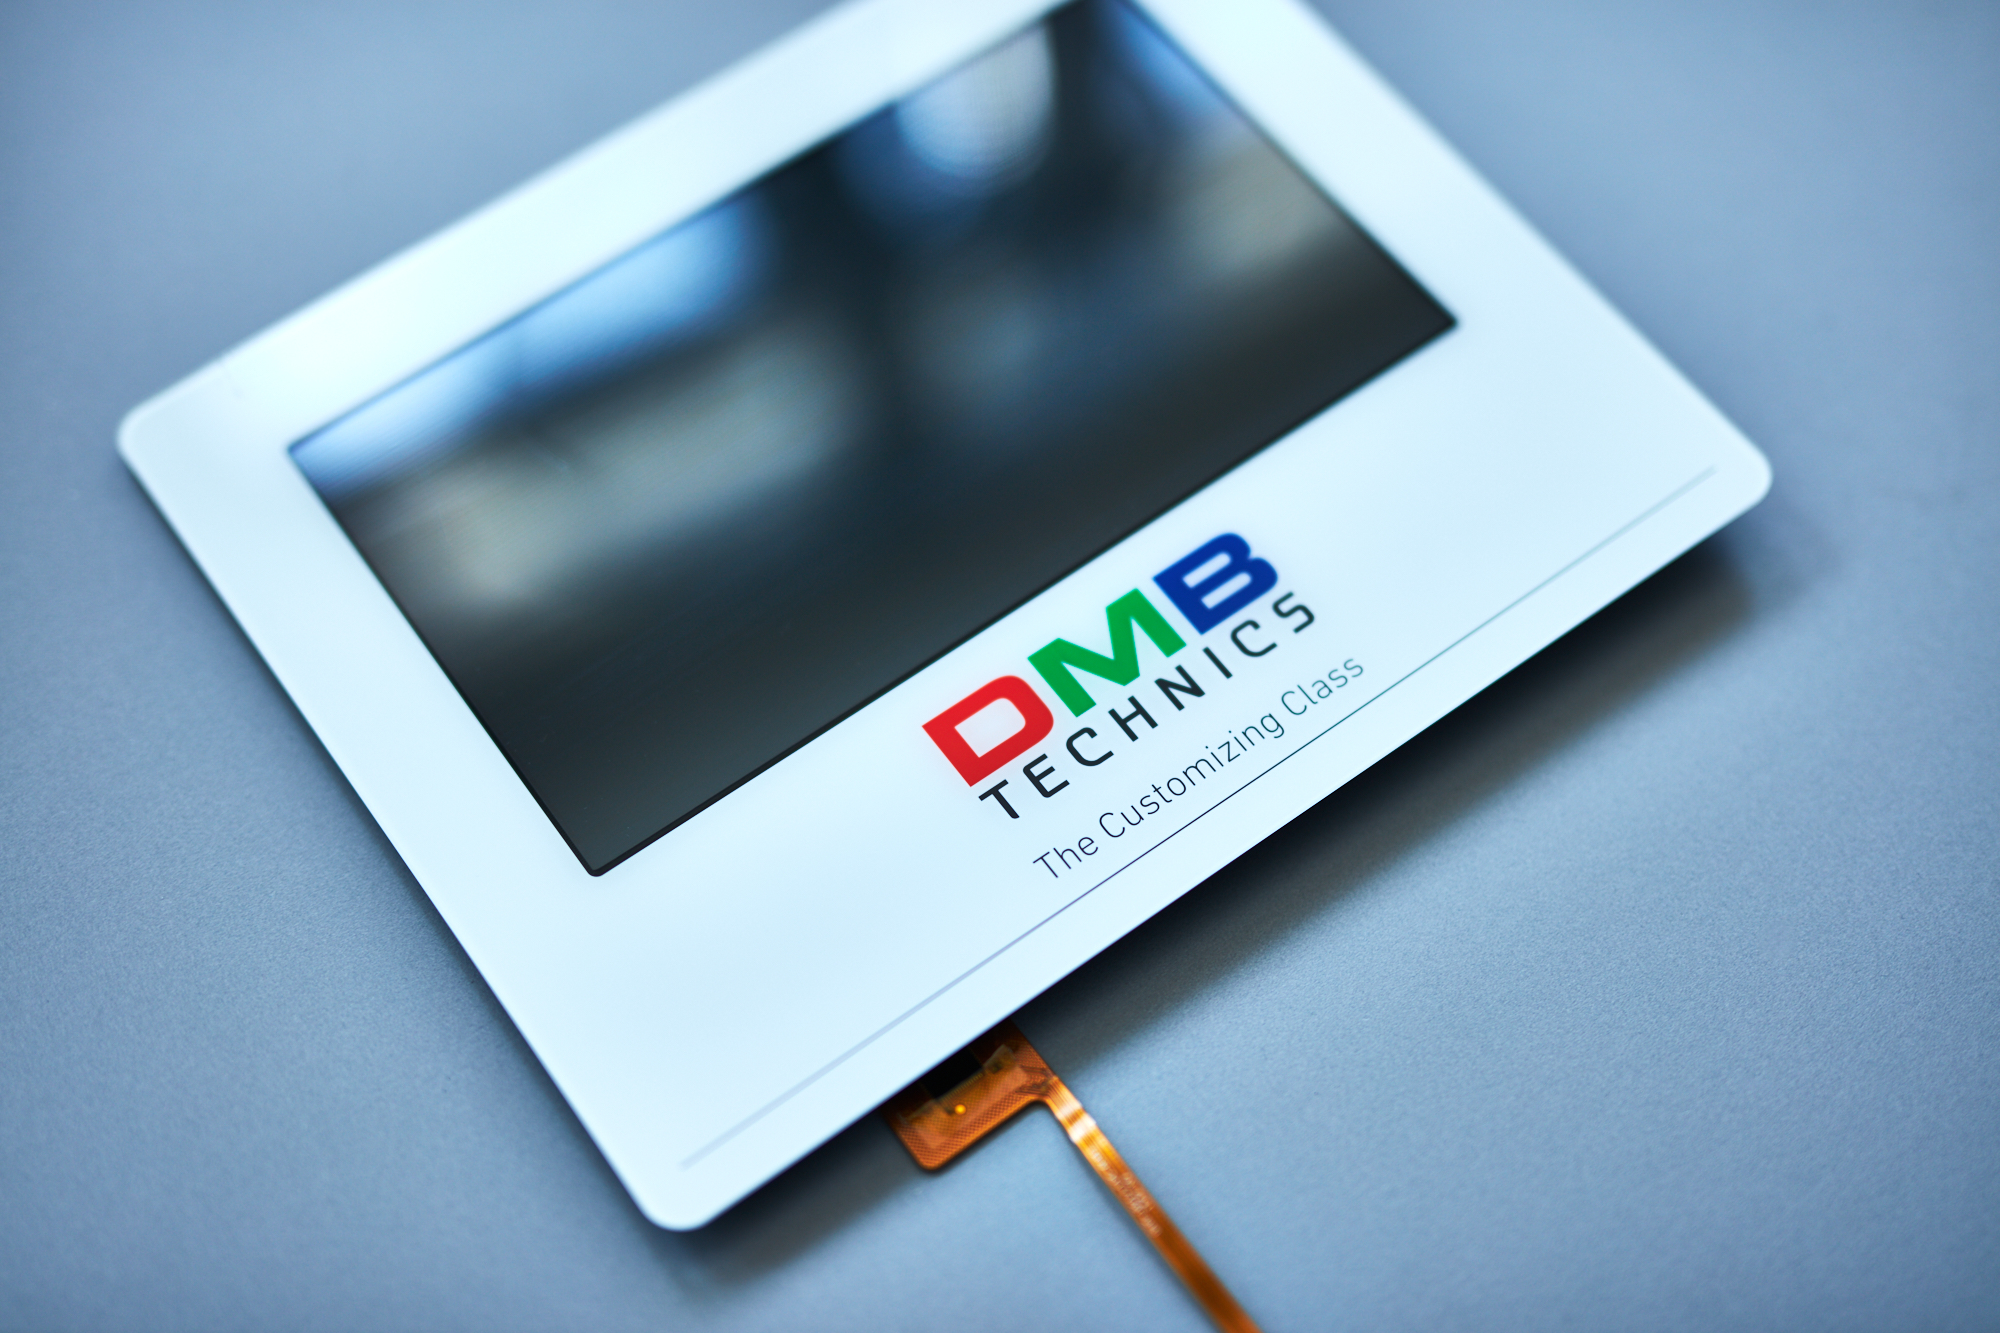 DDMB Technics - the specialist for customised display solutions